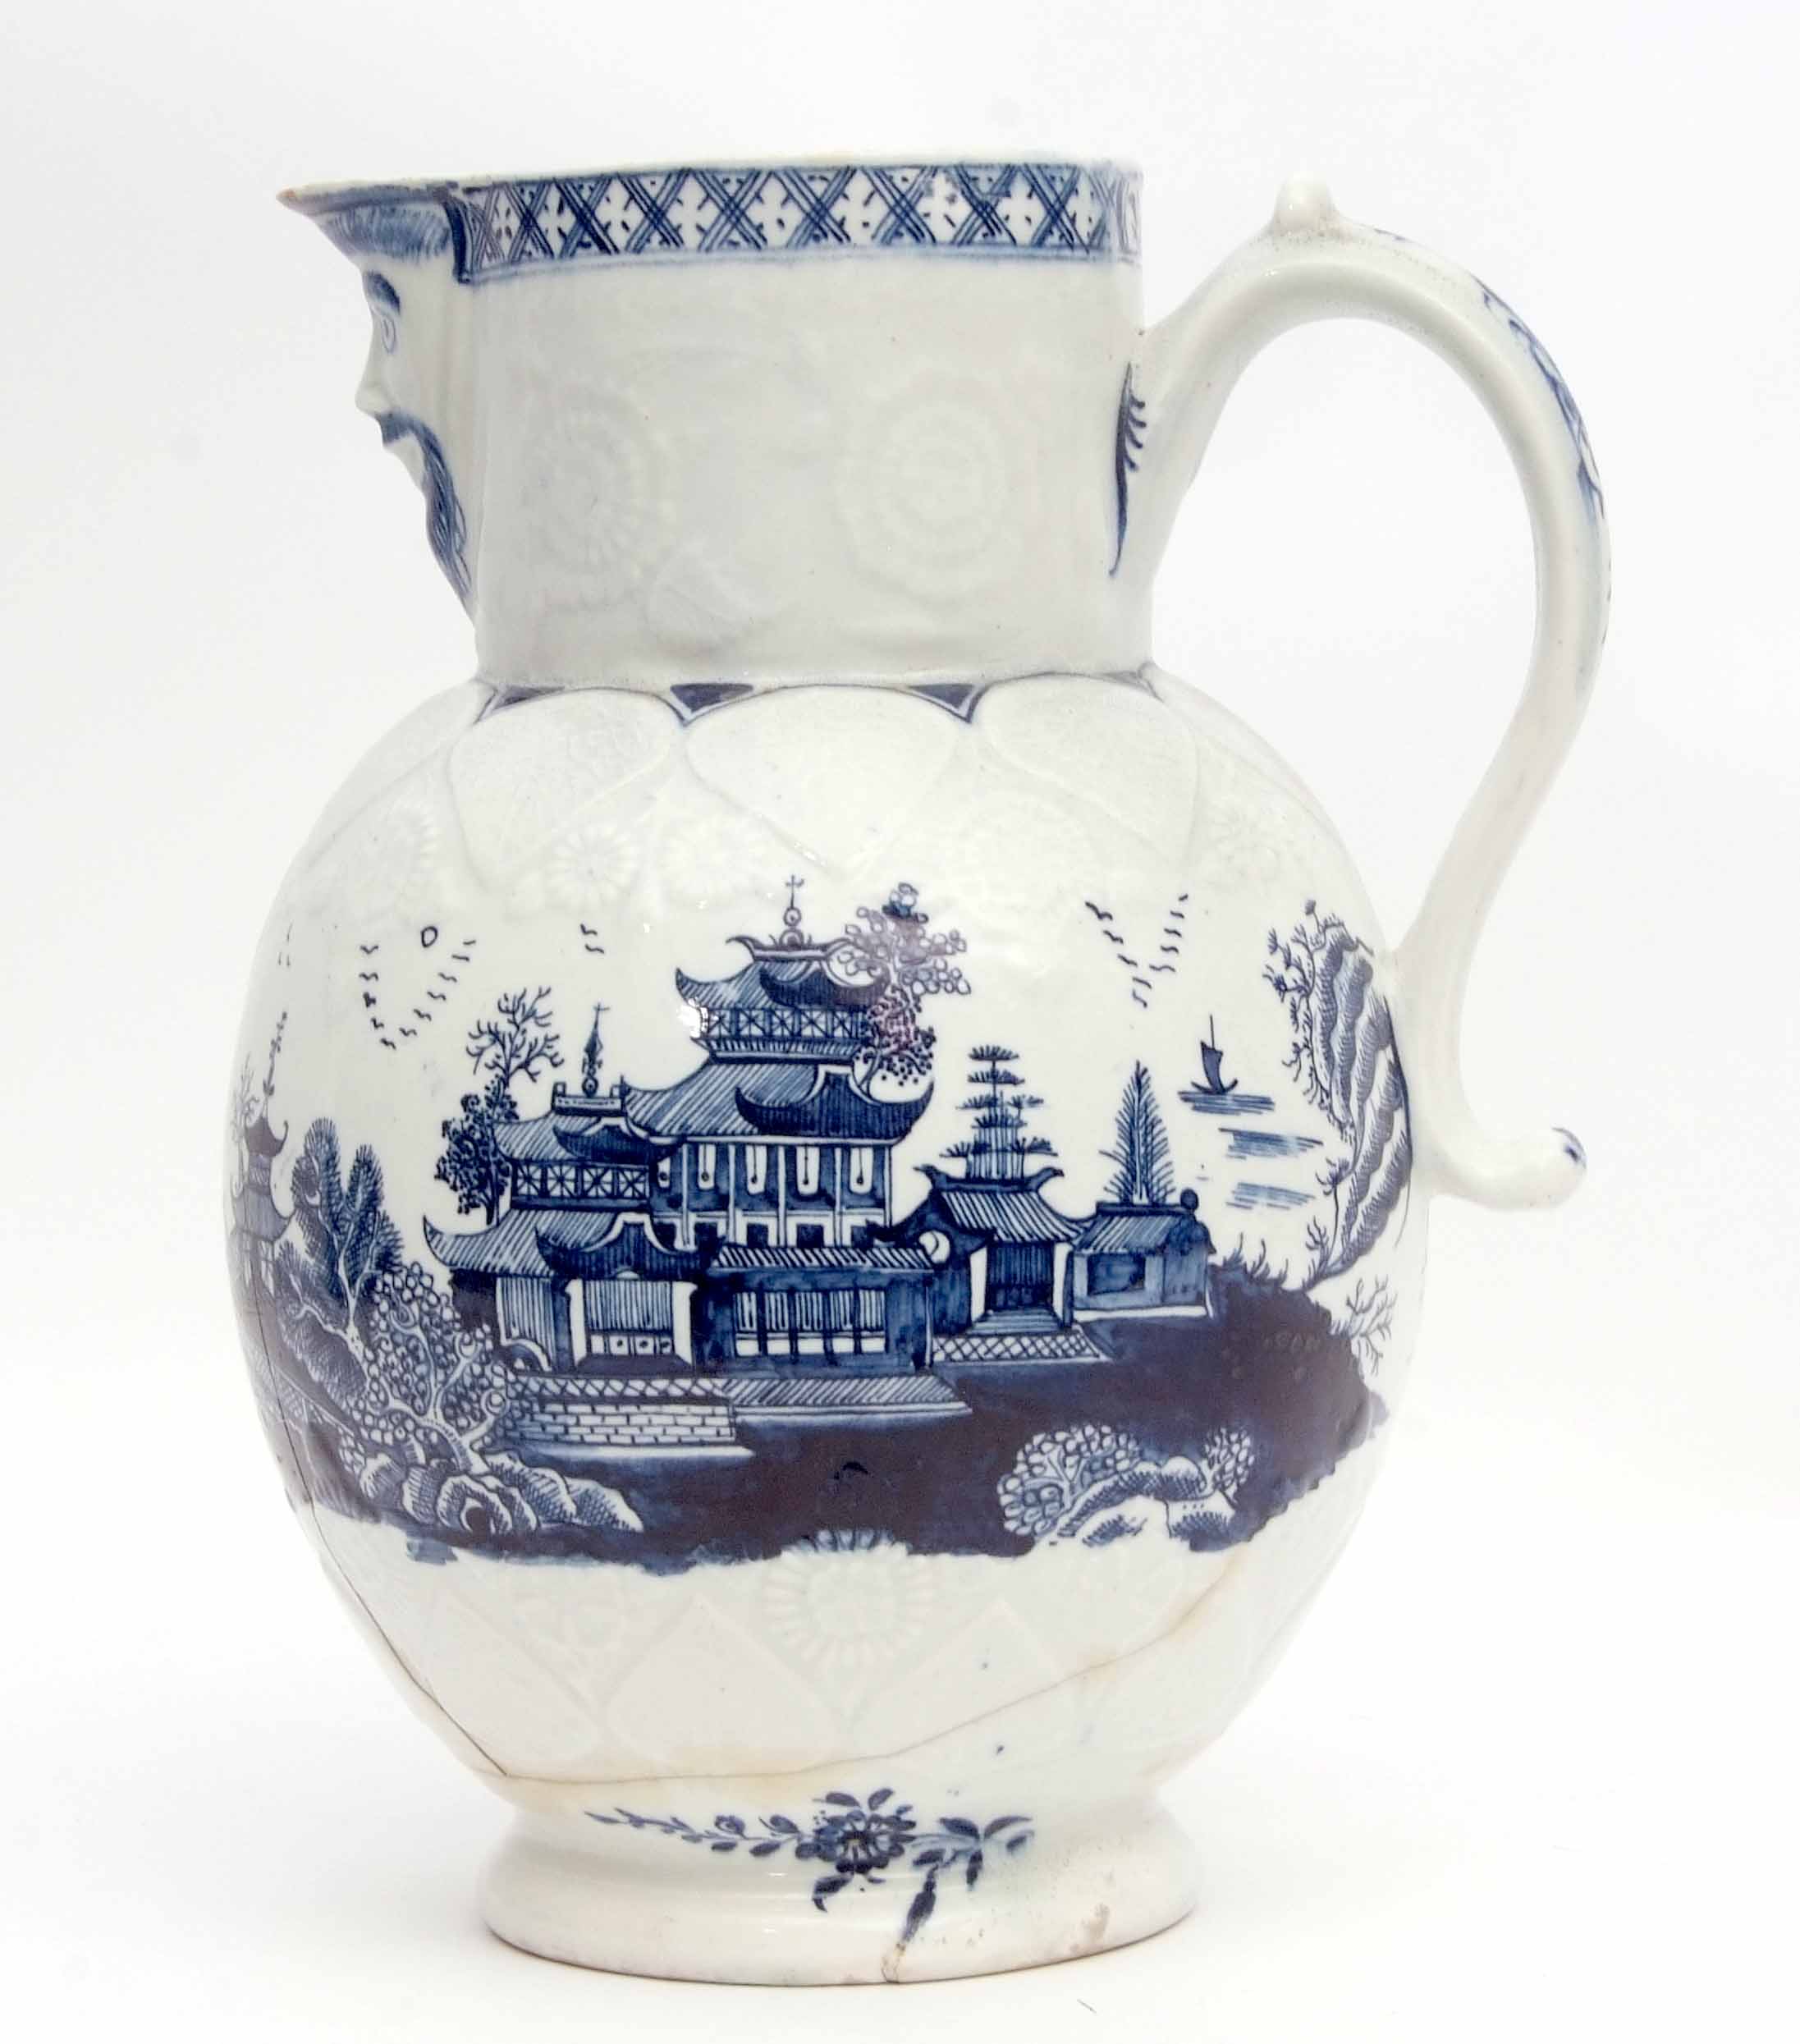 Rare Lowestoft mask jug, the moulded body decorated with pagodas and Chinese island scenes, the